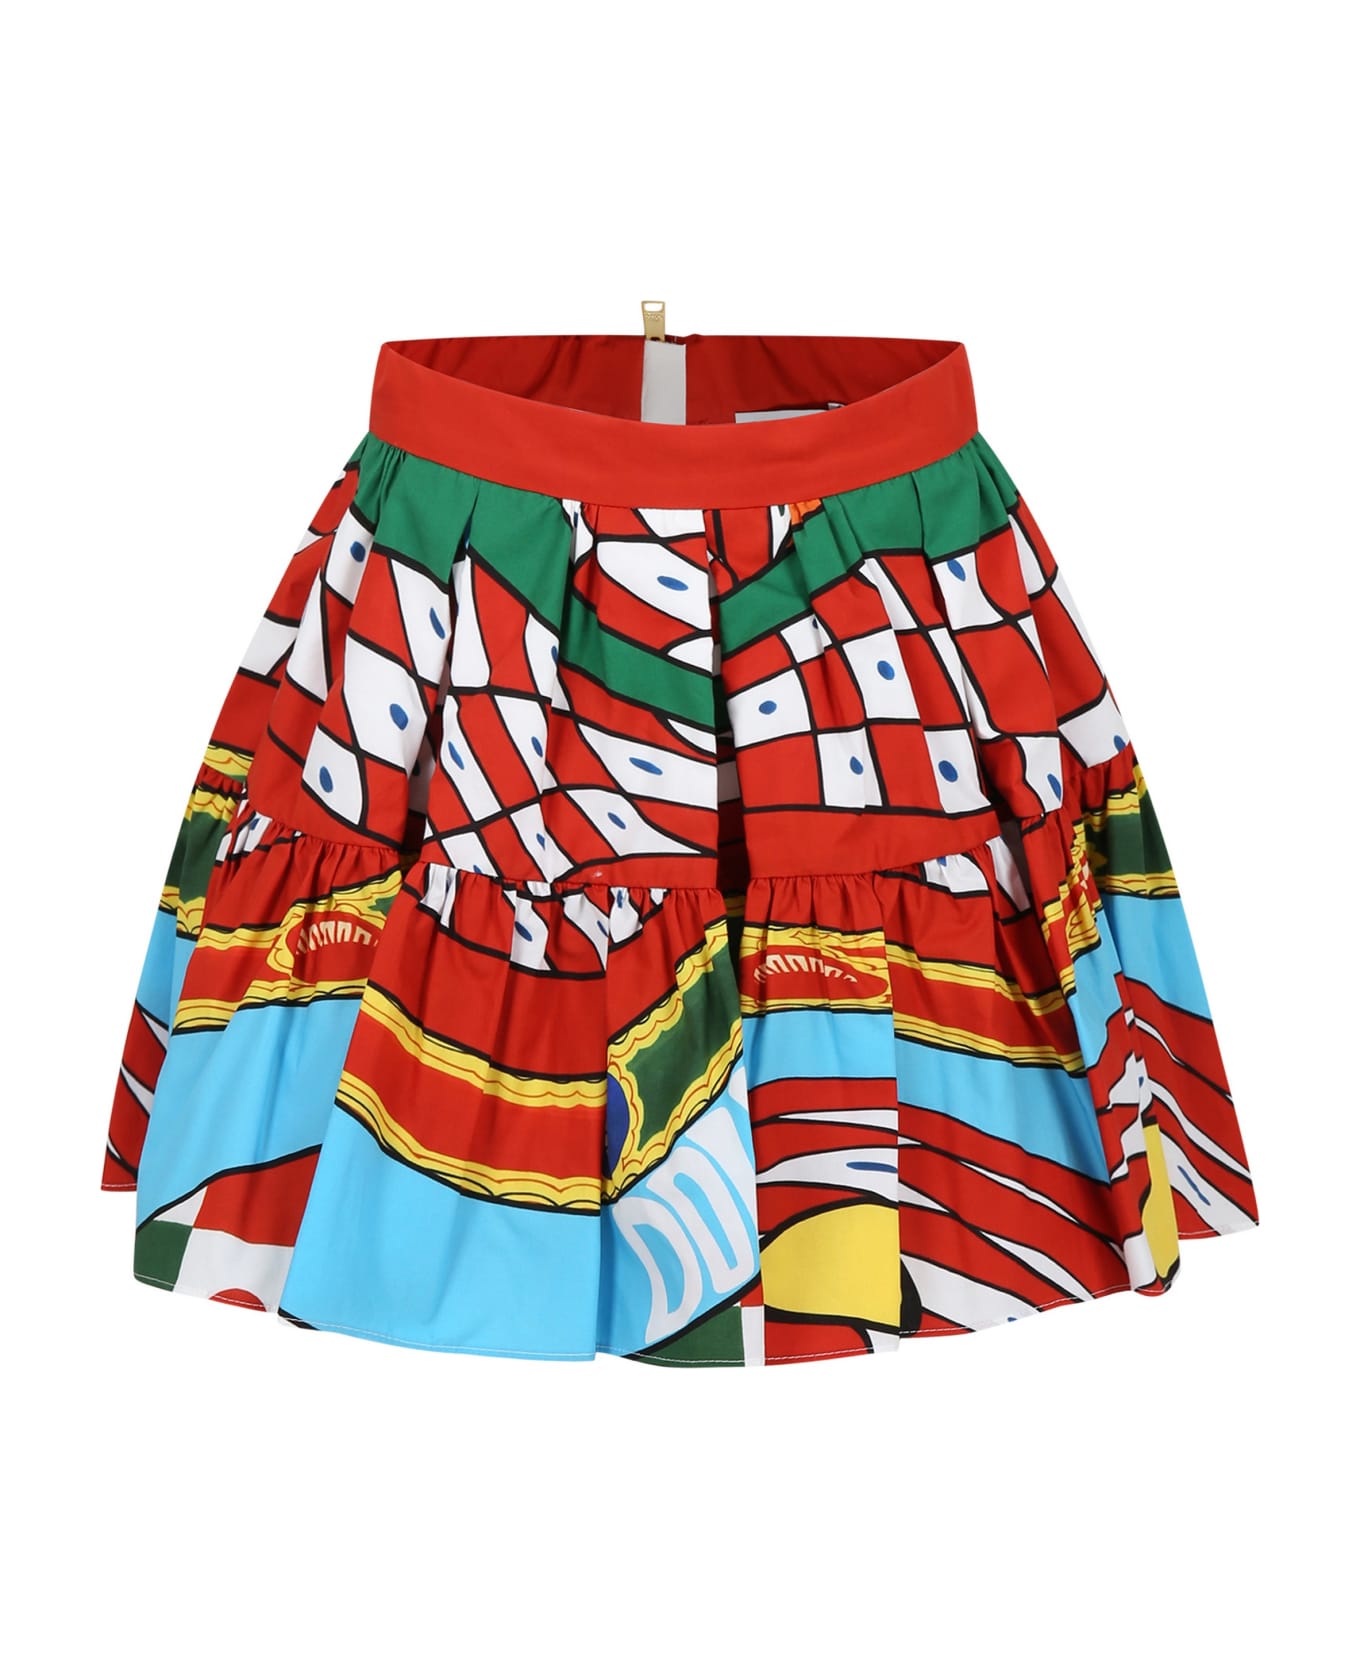 Dolce & Gabbana Red Skirt For Girl With Logo And Cart Print - Multicolor ボトムス